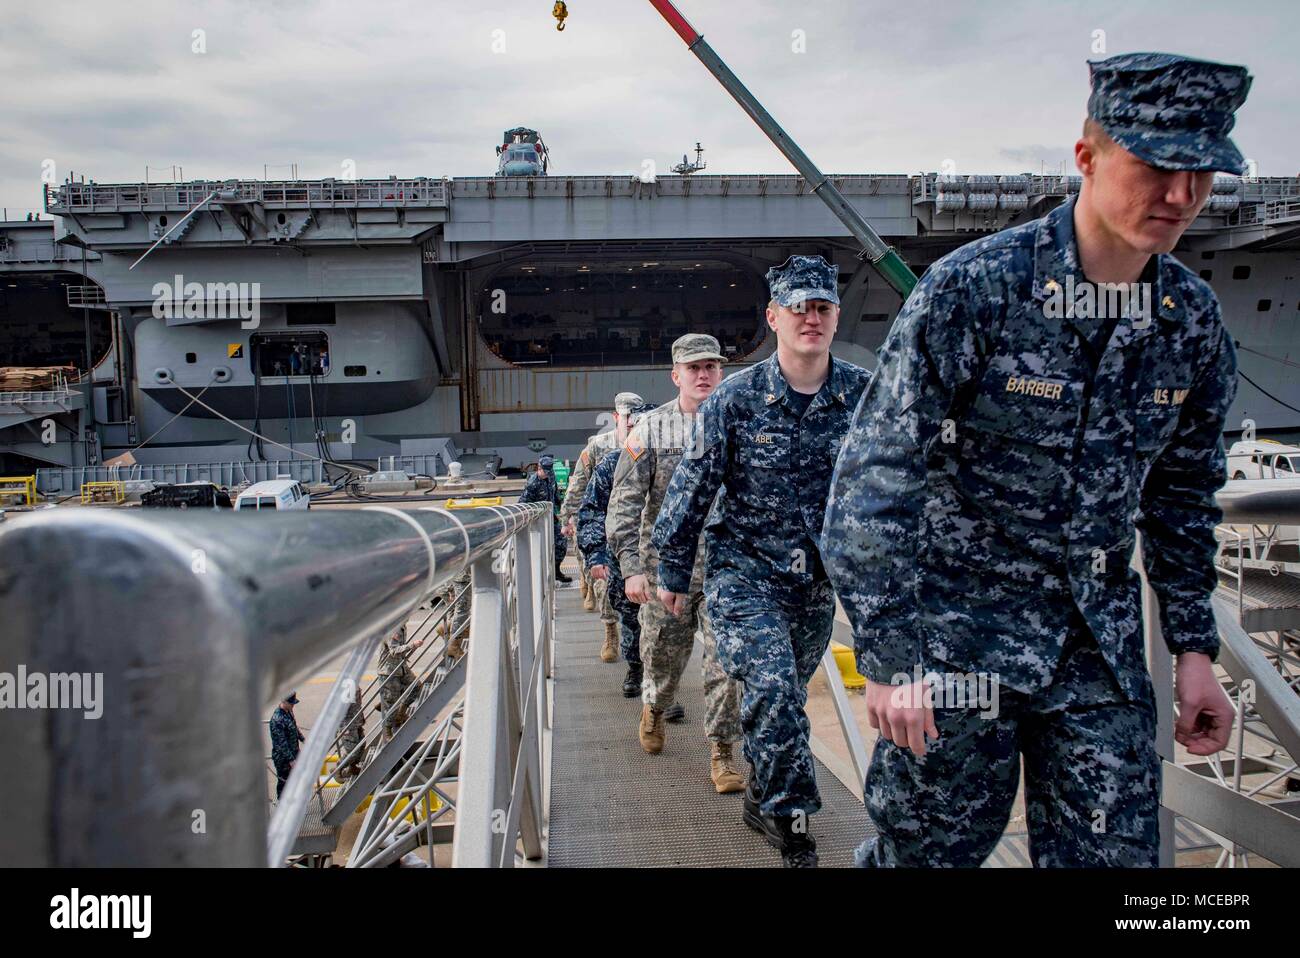 180410-N-SO730-0024 NORFOLK, Va (April 10, 2018) Cadets and midshipmen from the Virginia Military Institute (VMI) walk up the brow aboard the aircraft carrier USS George H.W. Bush (CVN 77) for a tour. The ship is in Norfolk, Virginia conducting sustainment exercises to maintain carrier readiness. (U.S. Navy photo by Mass Communication Specialist 3rd Class Joe Boggio) Stock Photo